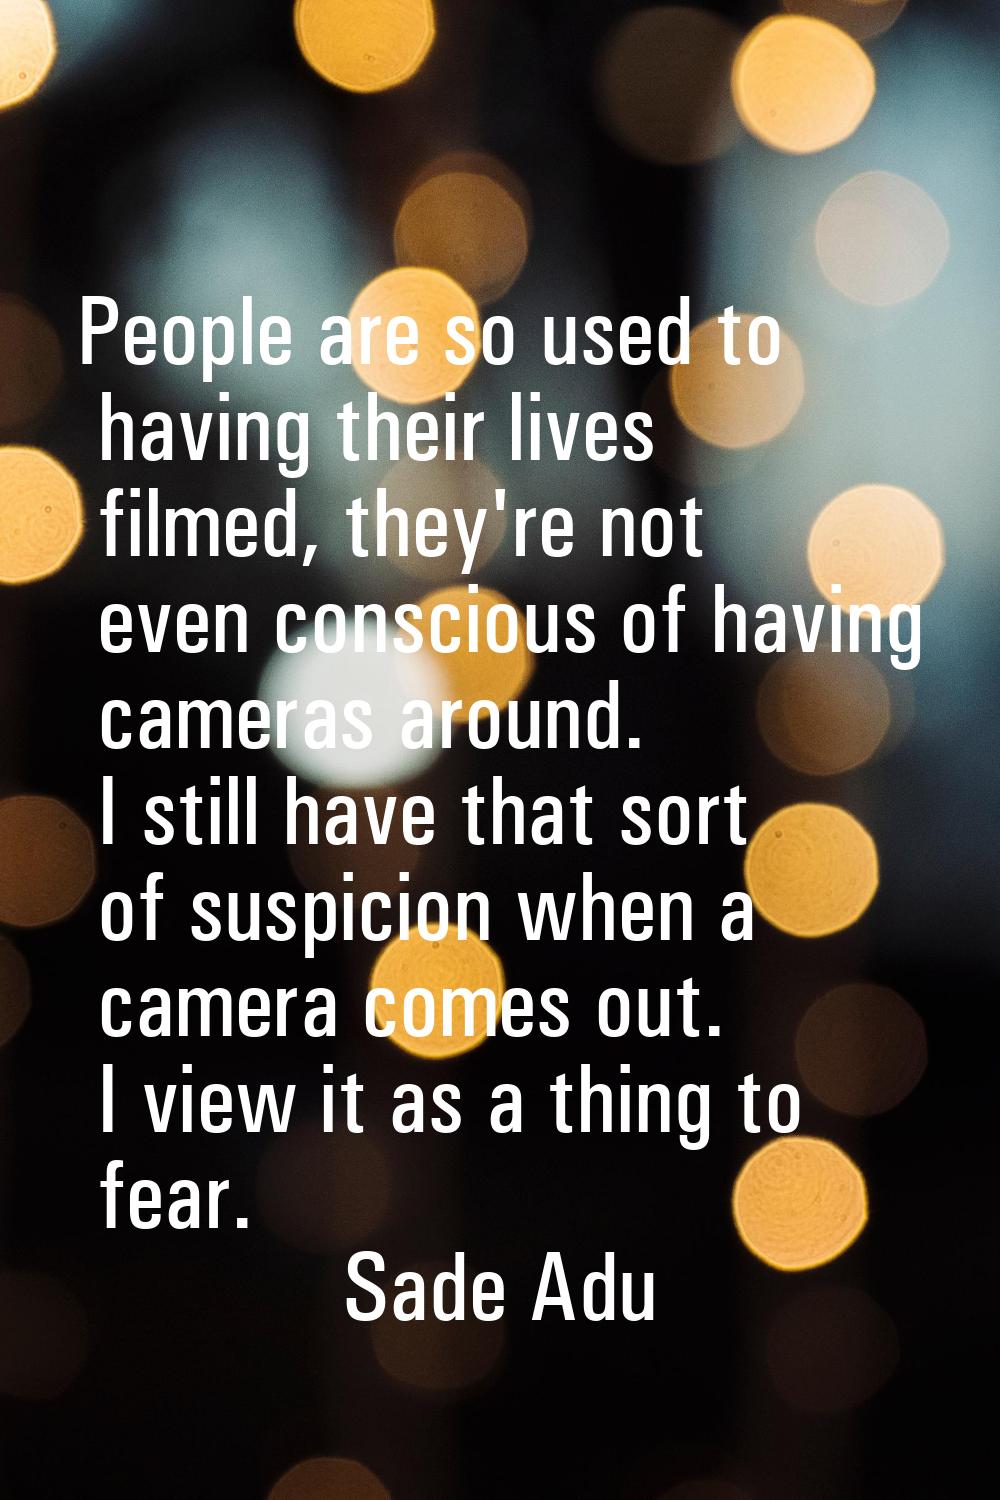 People are so used to having their lives filmed, they're not even conscious of having cameras aroun